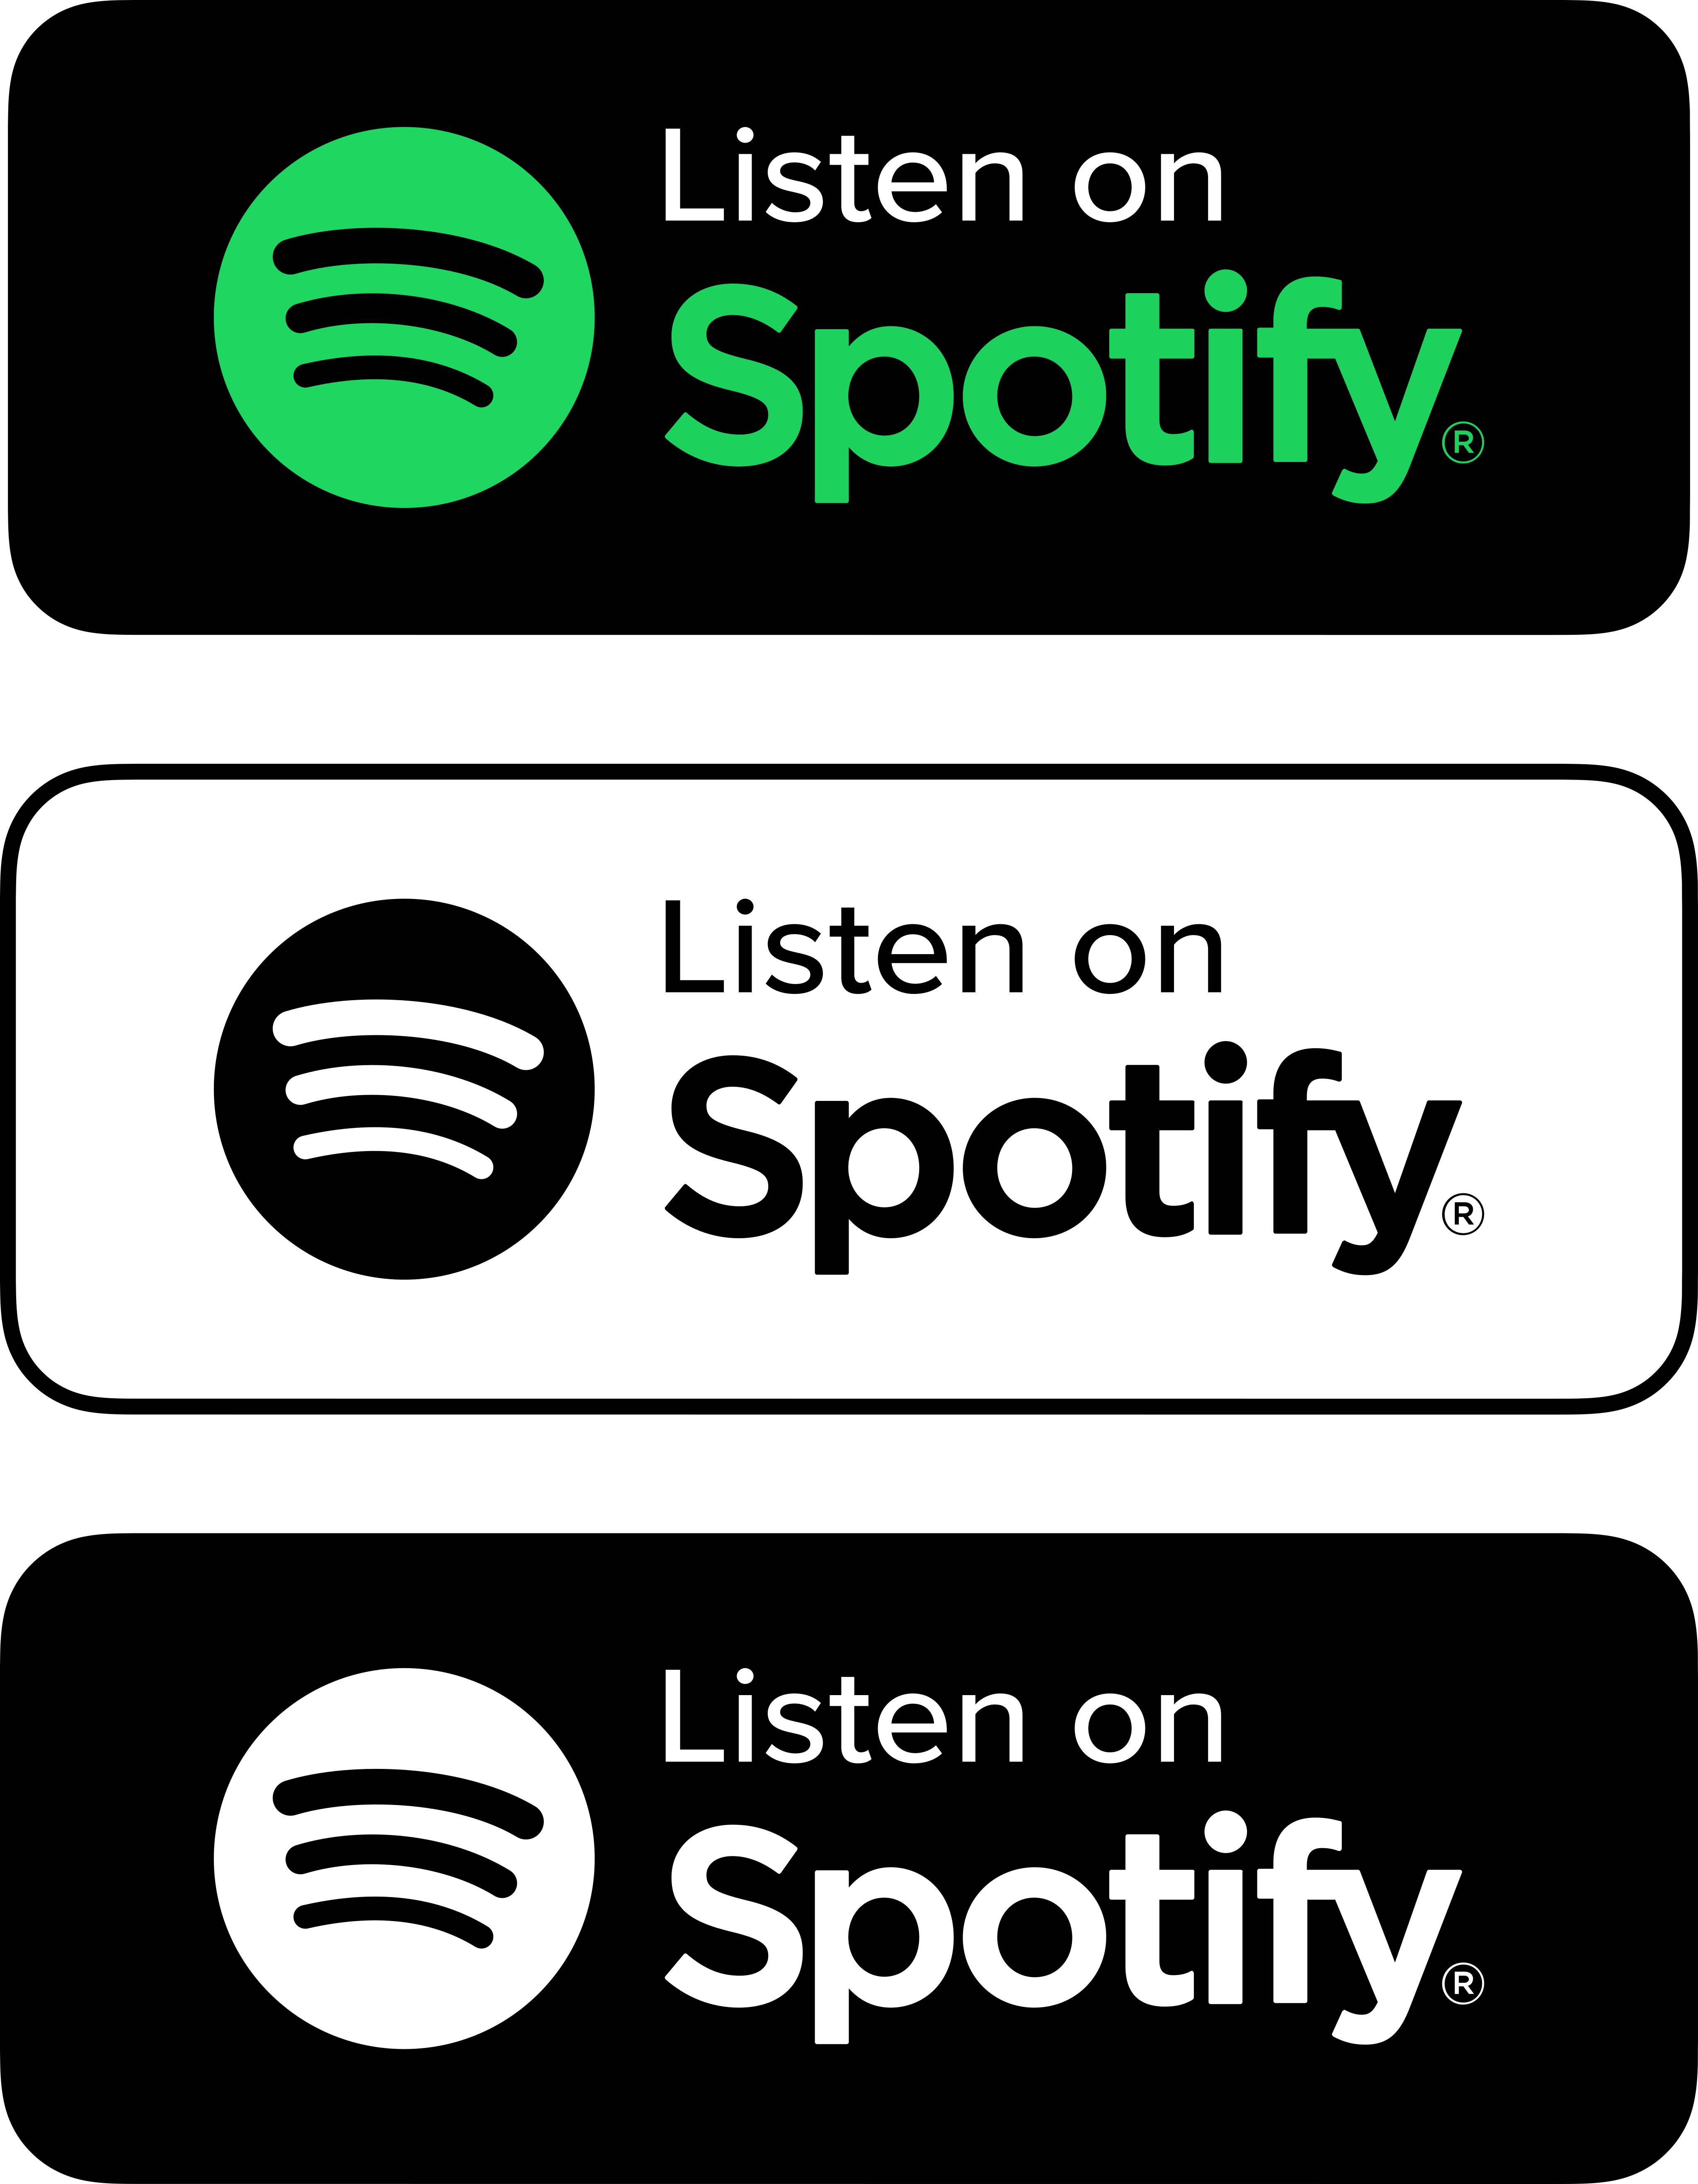 Listen on Spotify PNG.